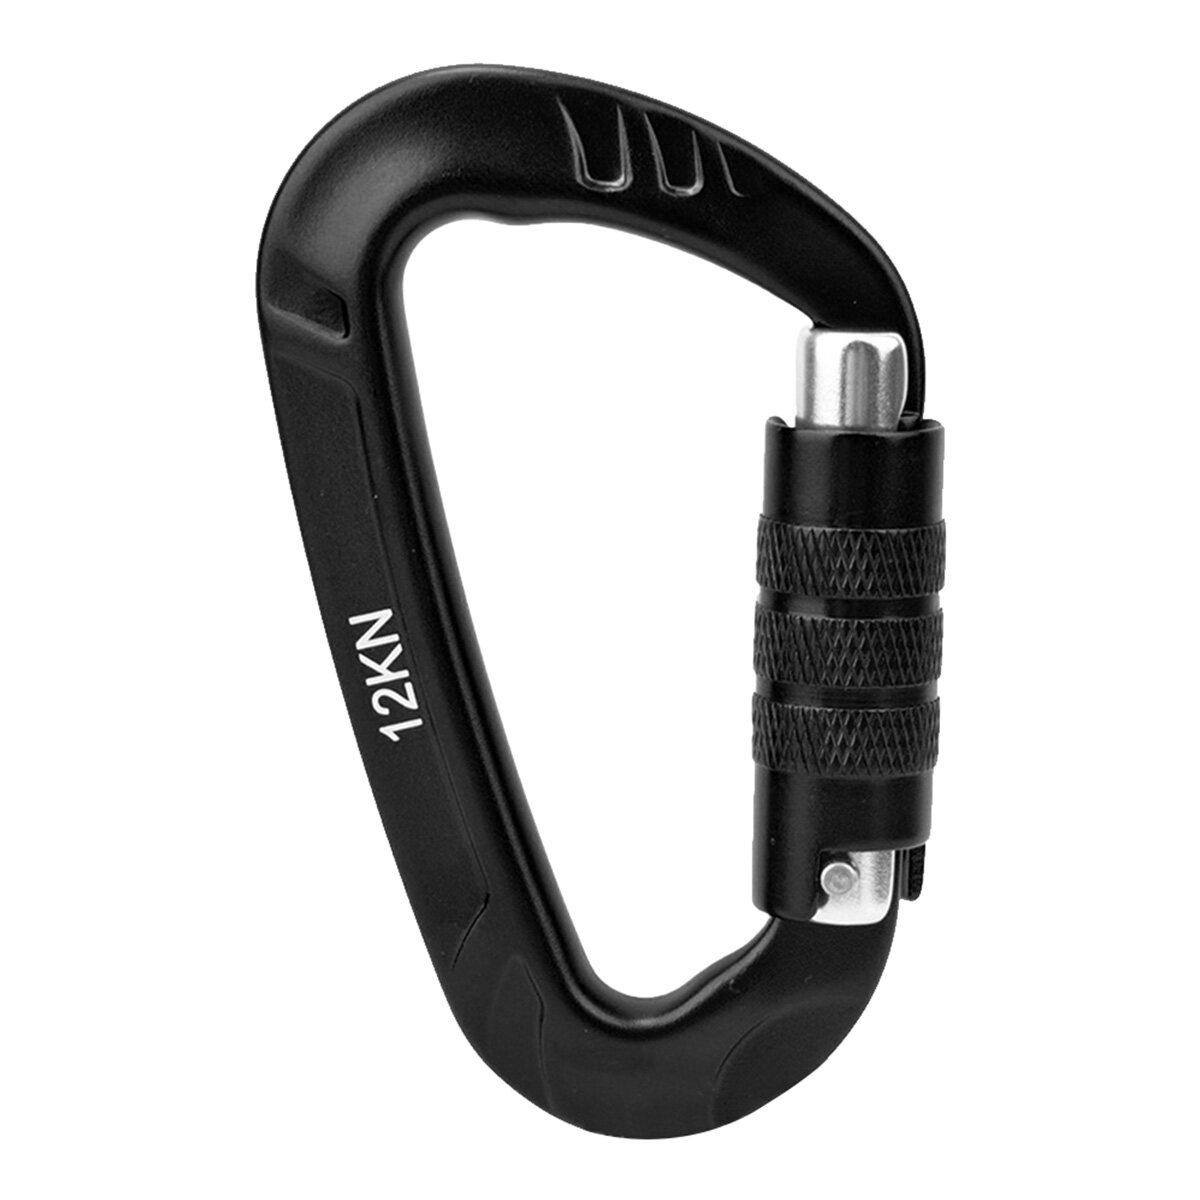 12KN Aviation Aluminum Alloy Carabiner Anti-skid Outdoor Camping Climbing Safety Clip Buckle Hook Survial Tool Outdoor Accessory